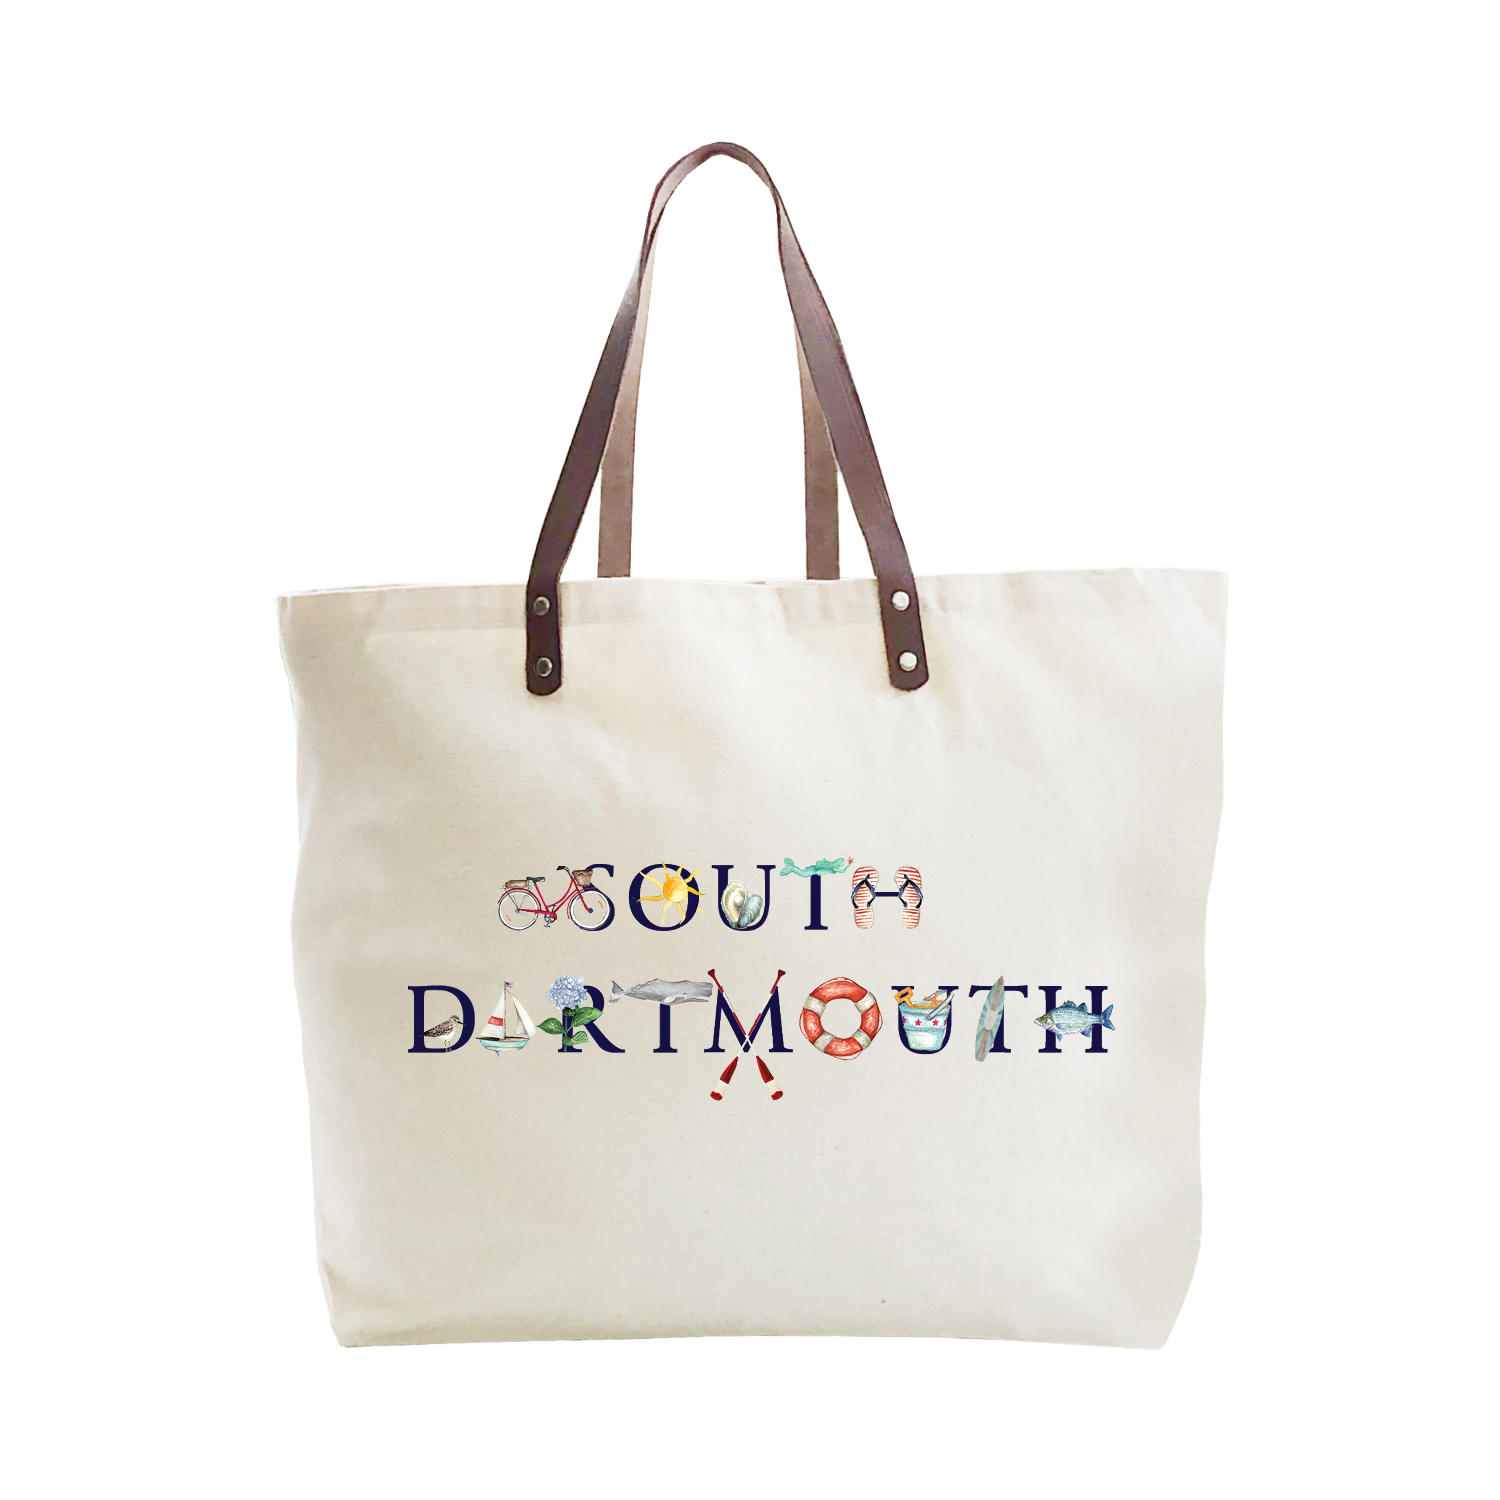 south dartmouth large tote